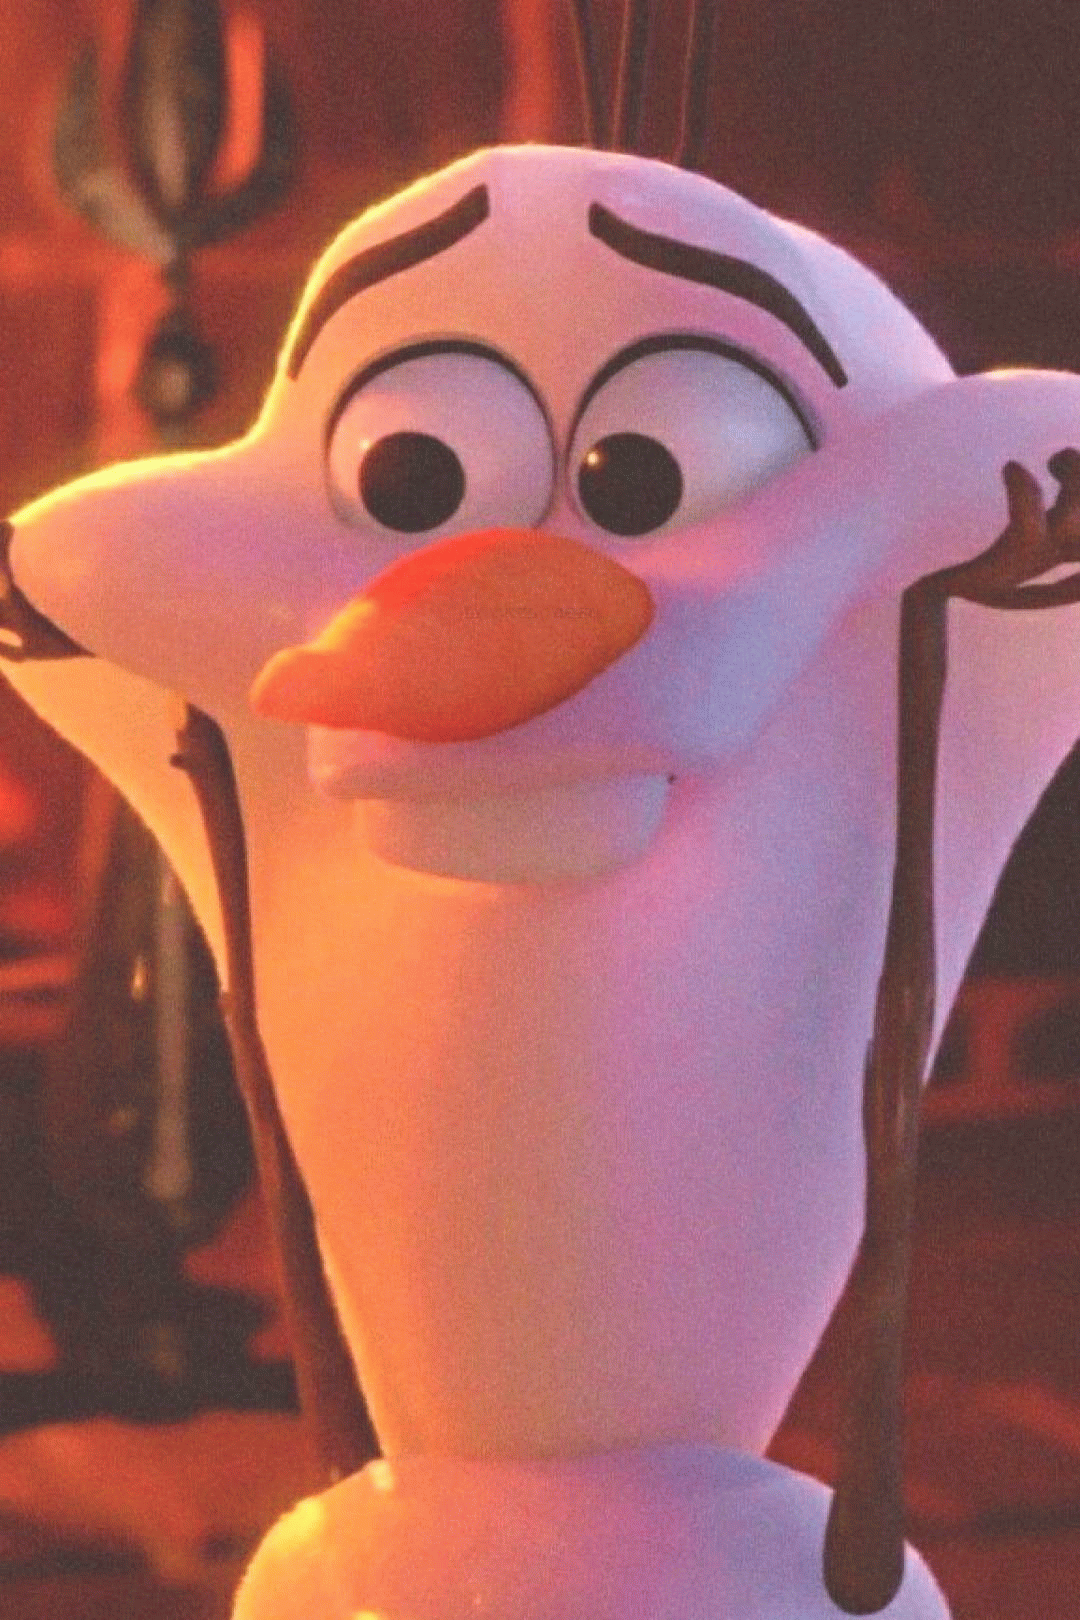 Olaf Aesthetic Wallpaper Free Olaf Aesthetic Background